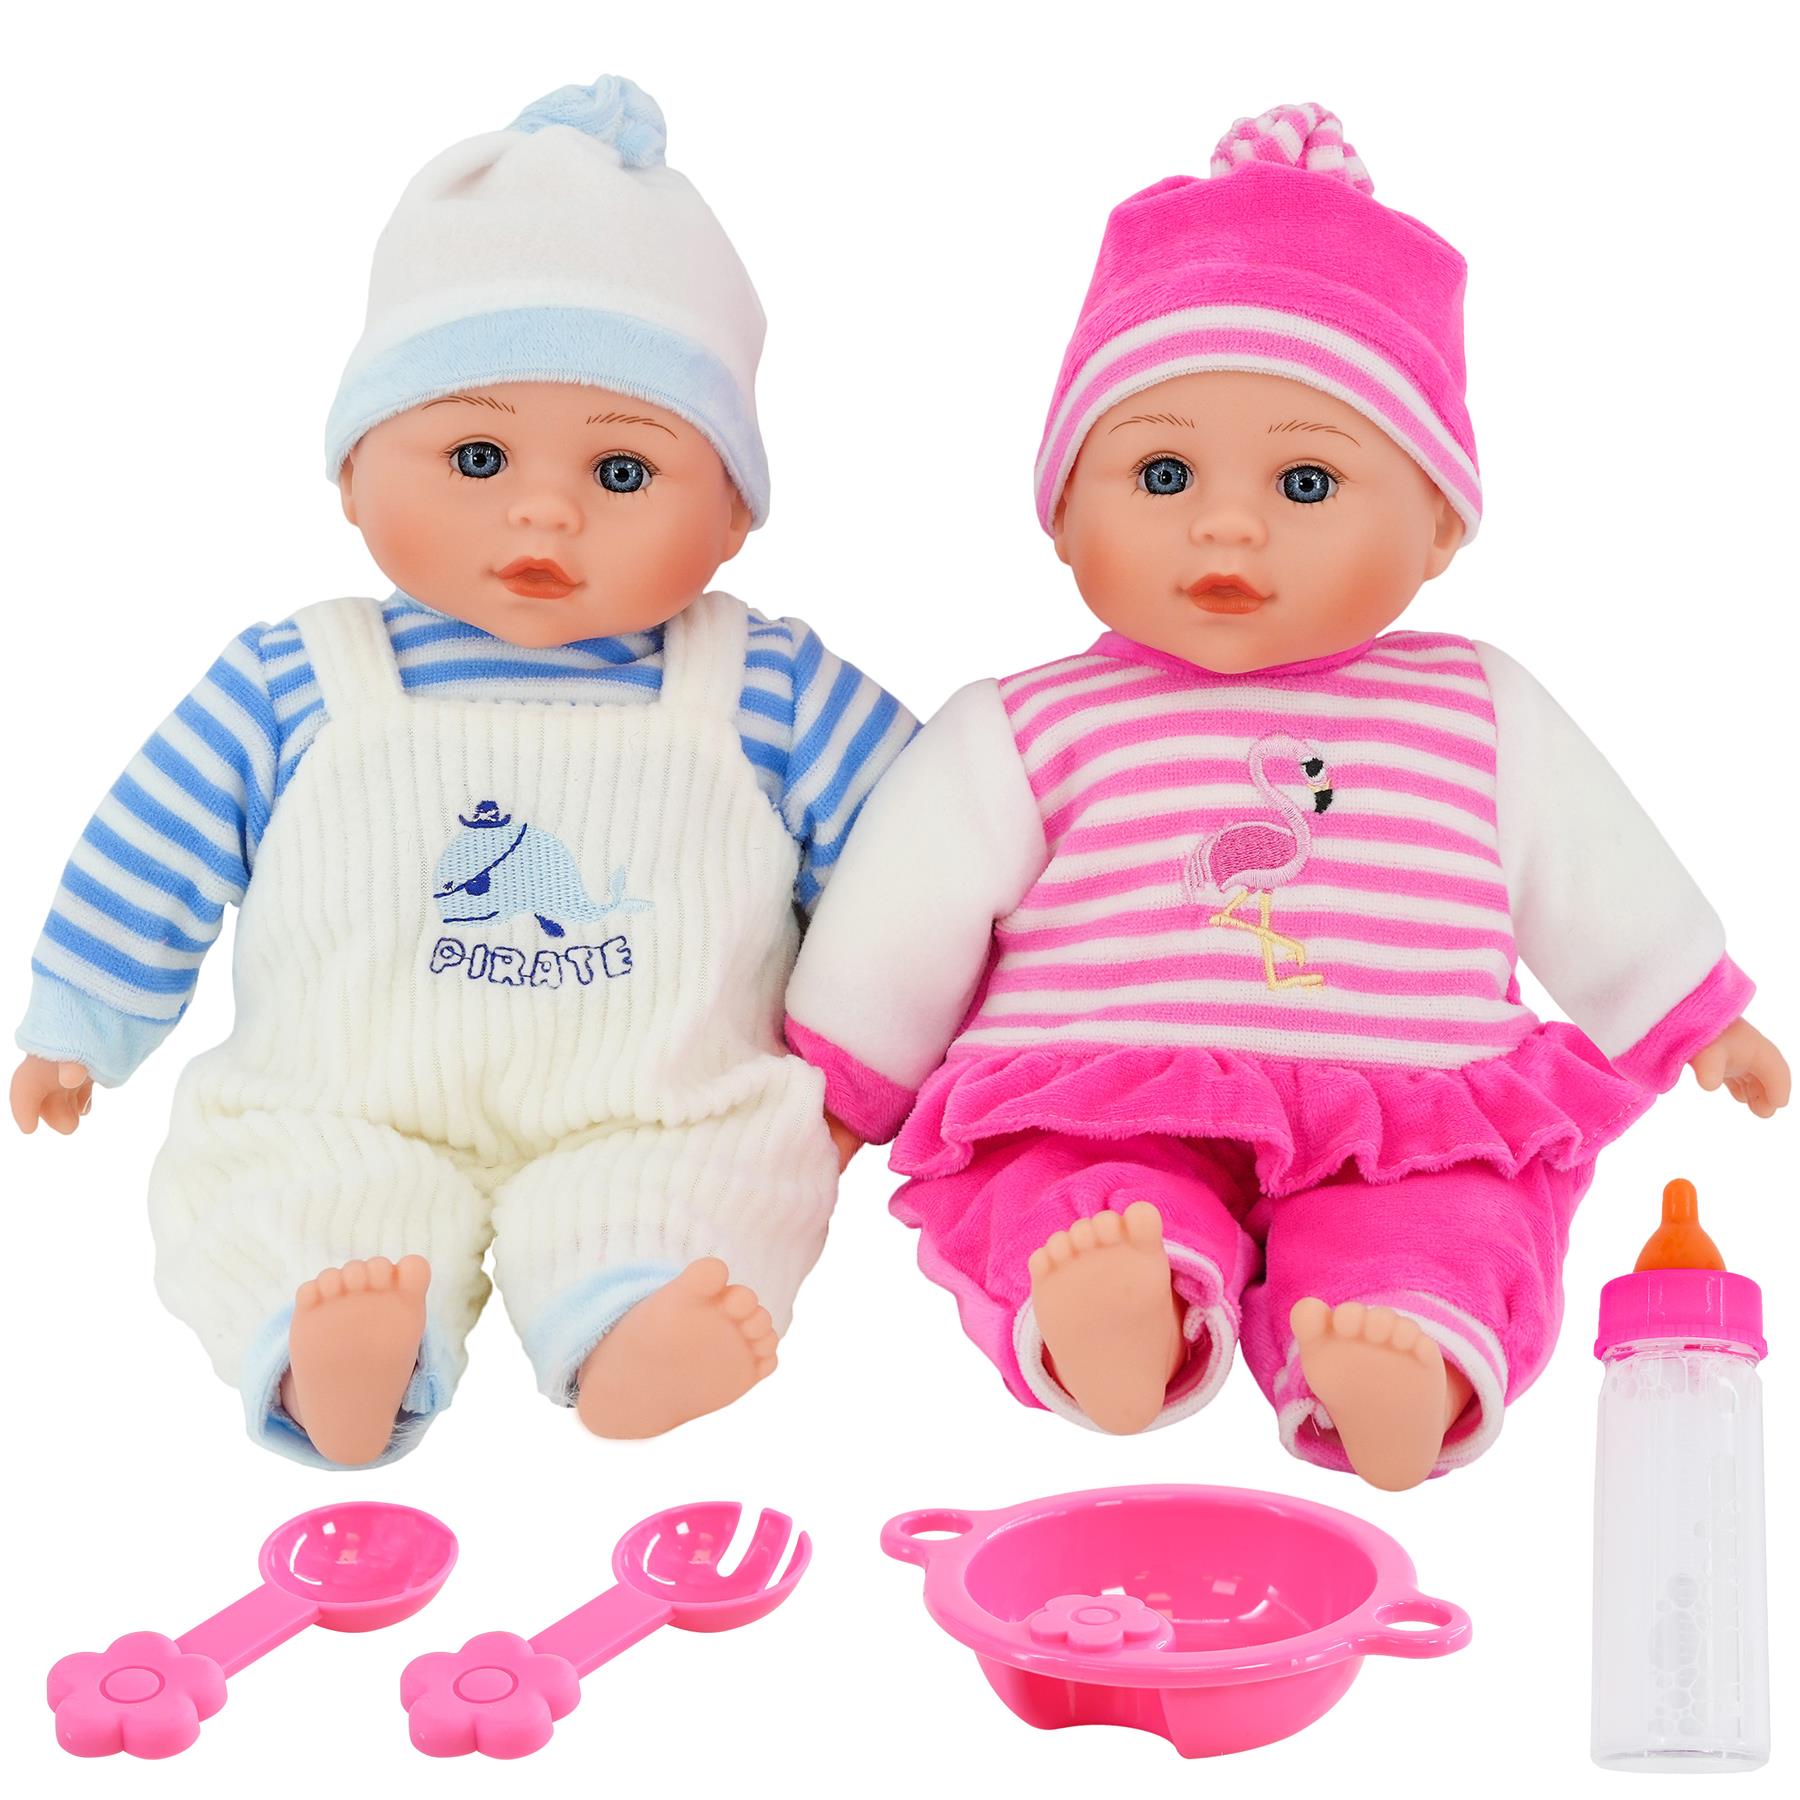 13” Twin Dolls Set With Sounds, Feeding Set & Magic Bottle by BiBi Doll - The Magic Toy Shop